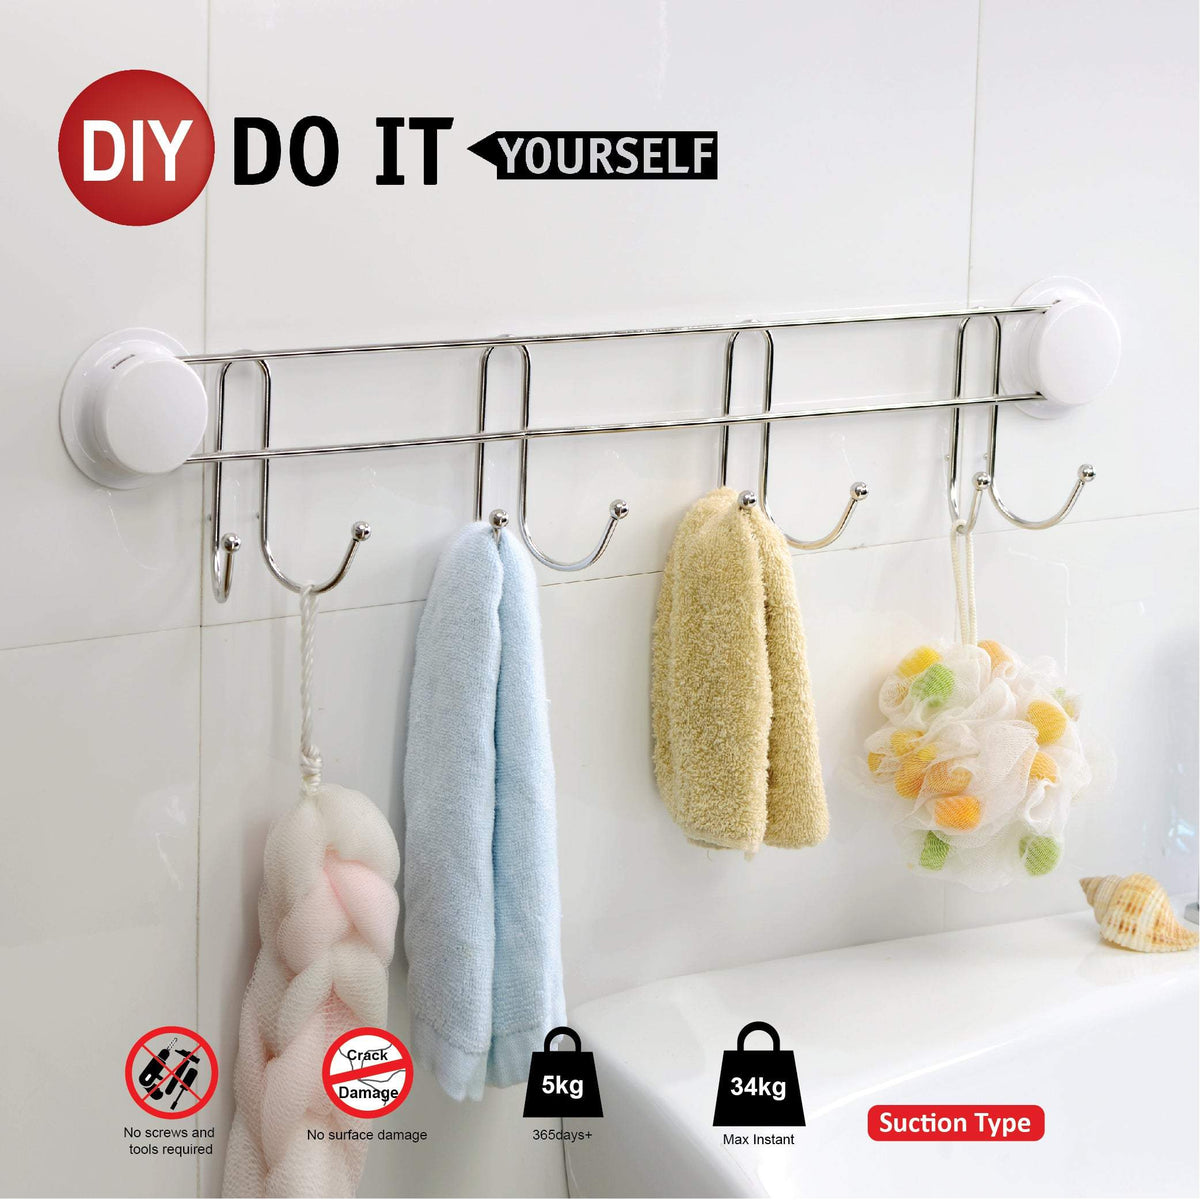 Suction hooks for the shower are designed with 8 towel hooks, suitable for hanging towels on the bathroom wall.  We can fix the bathroom hooks on the wall just minutes, never drill holes or screws. The heavy-duty suction cup helps stick on a smooth wall firmly.